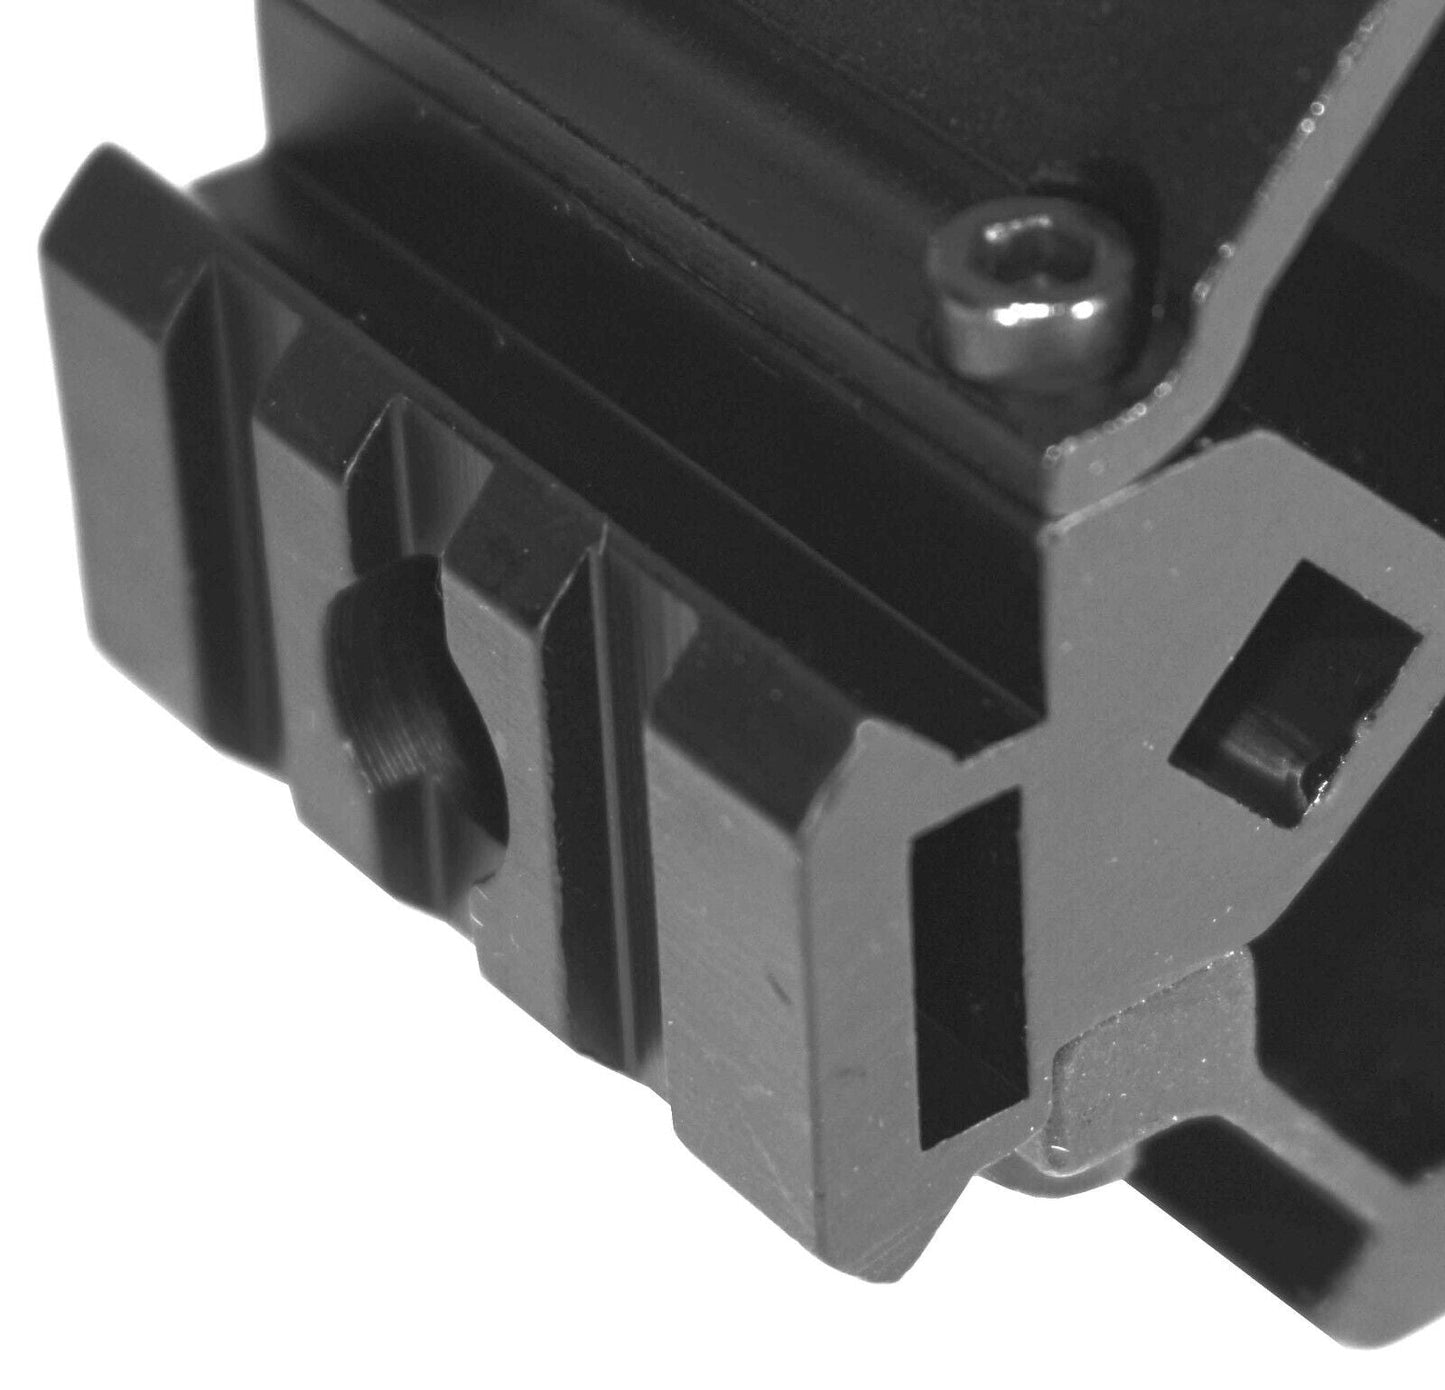 Tactical Magazine Tube Mount Compatible With Mossberg 500 12 Gauge Pumps.